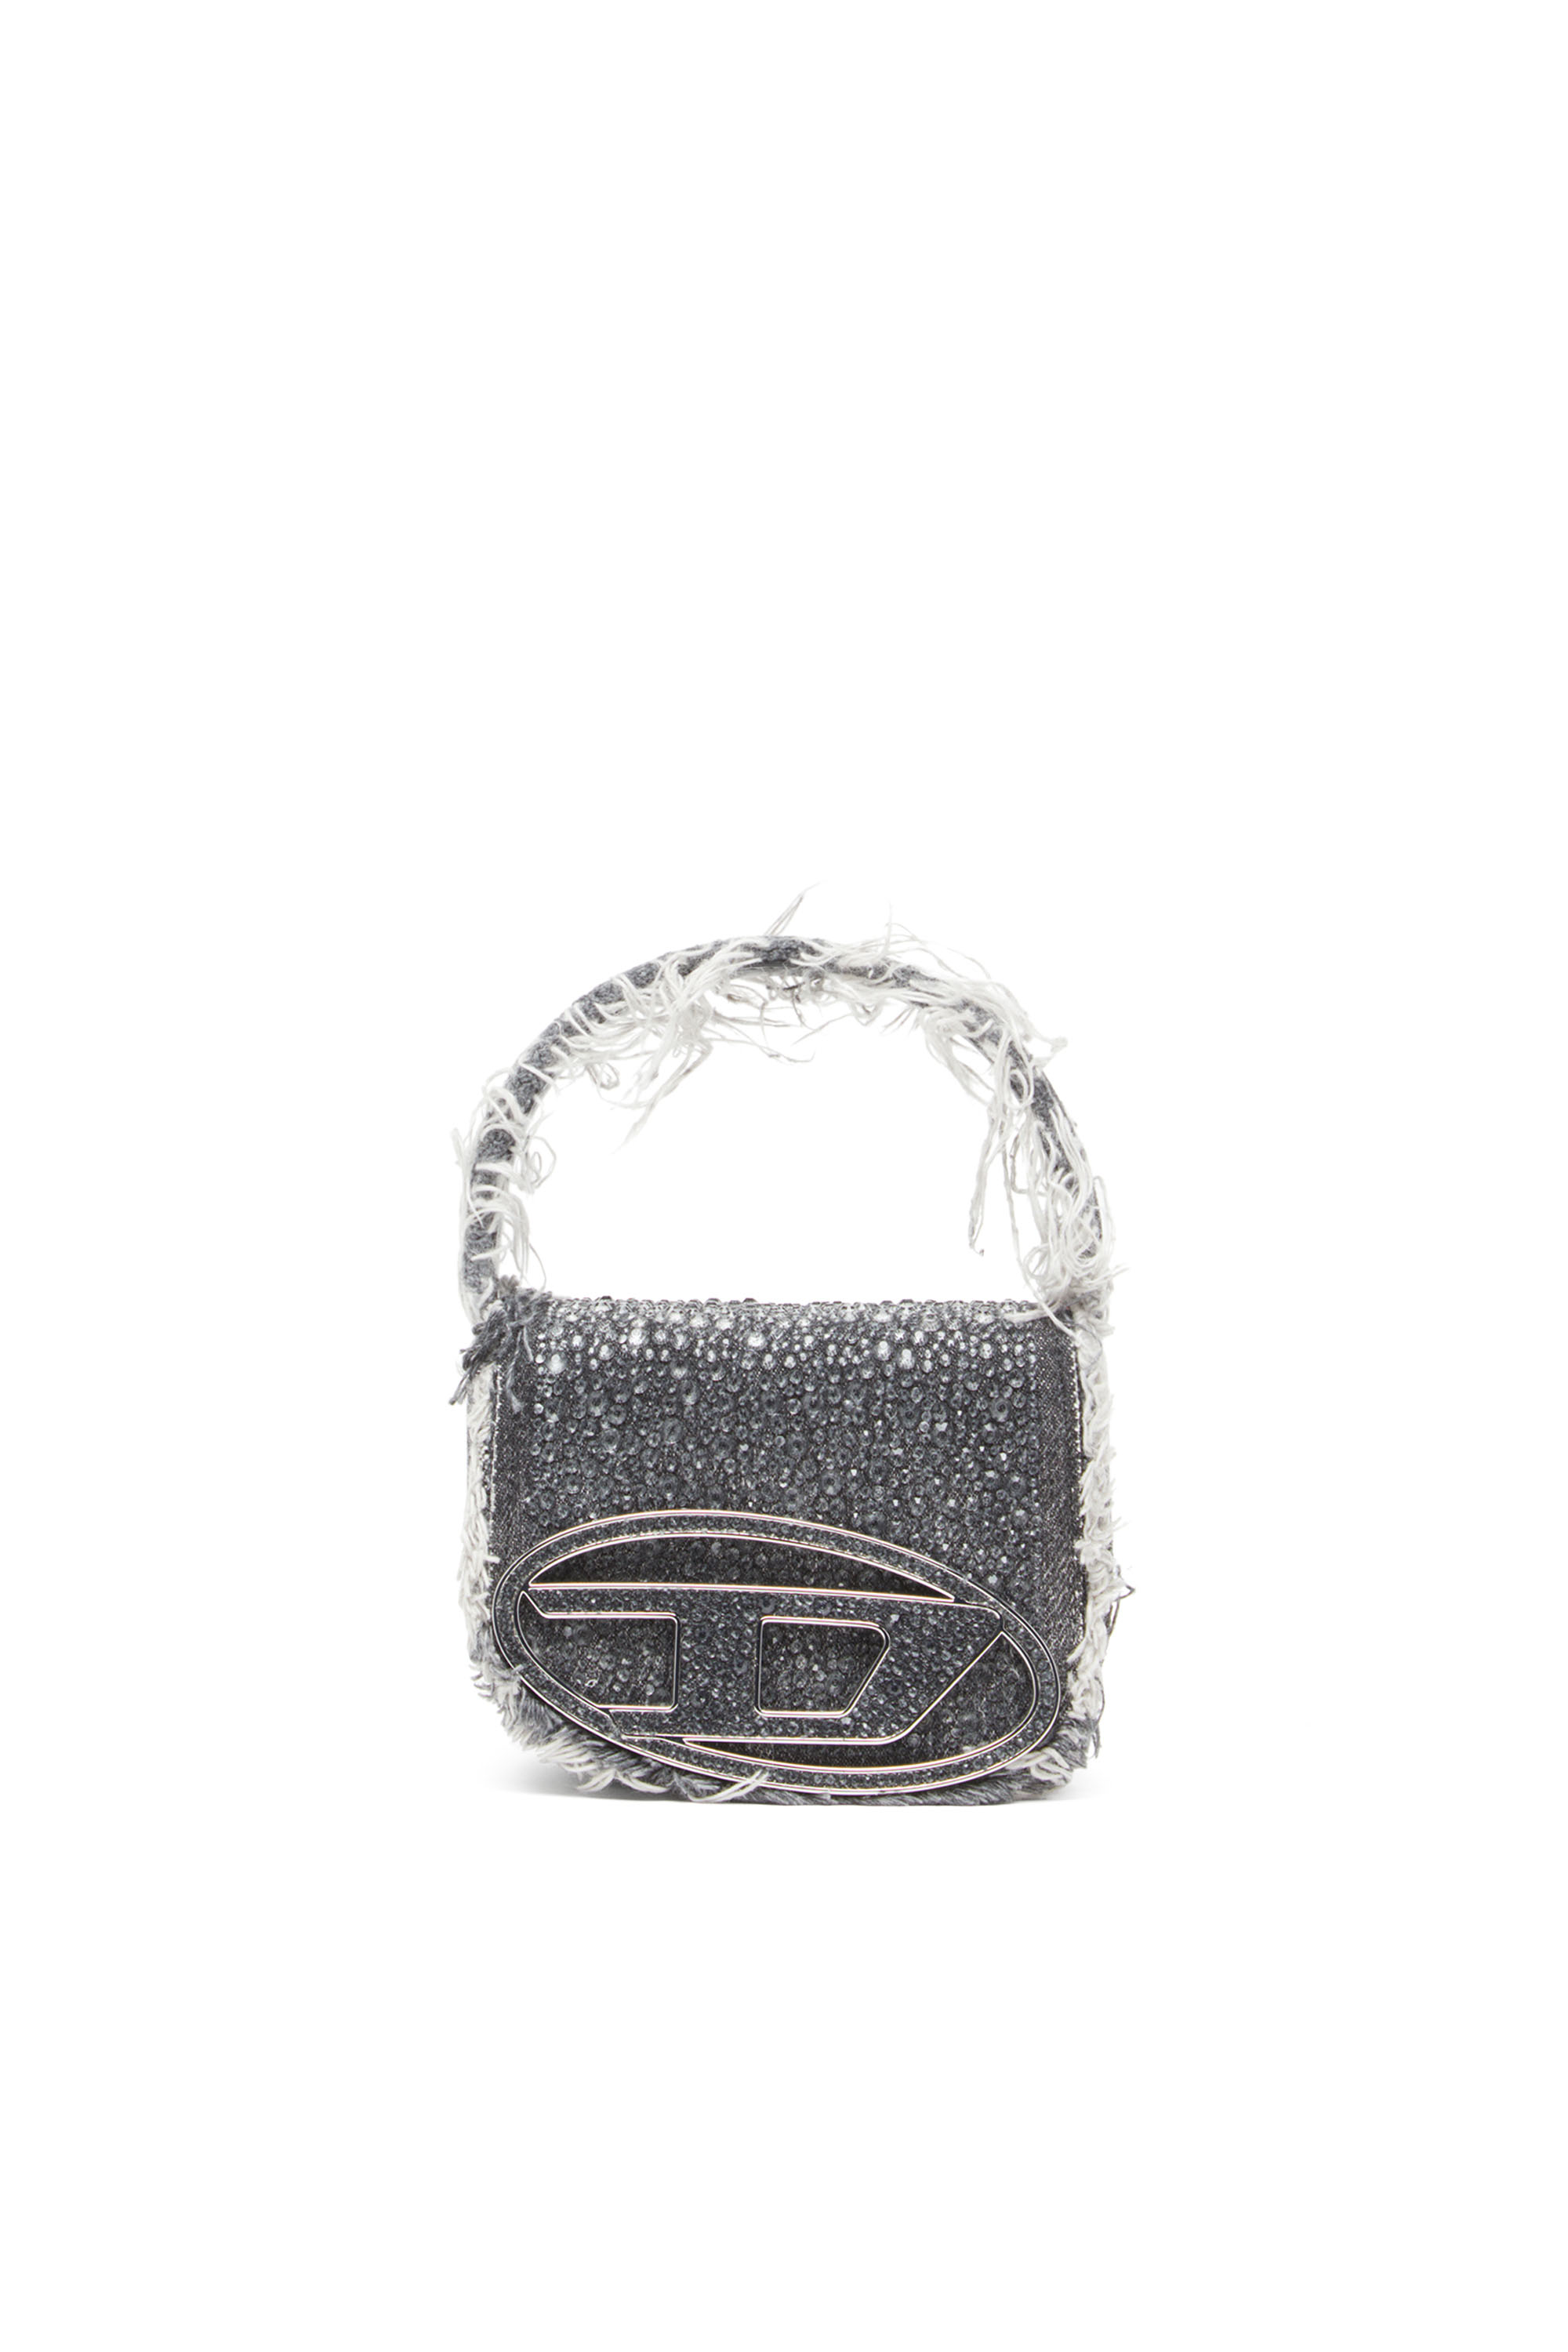 Diesel - 1DR XS, Female 1DR XS-Iconic mini bag in denim and crystals in ブラック - Image 1